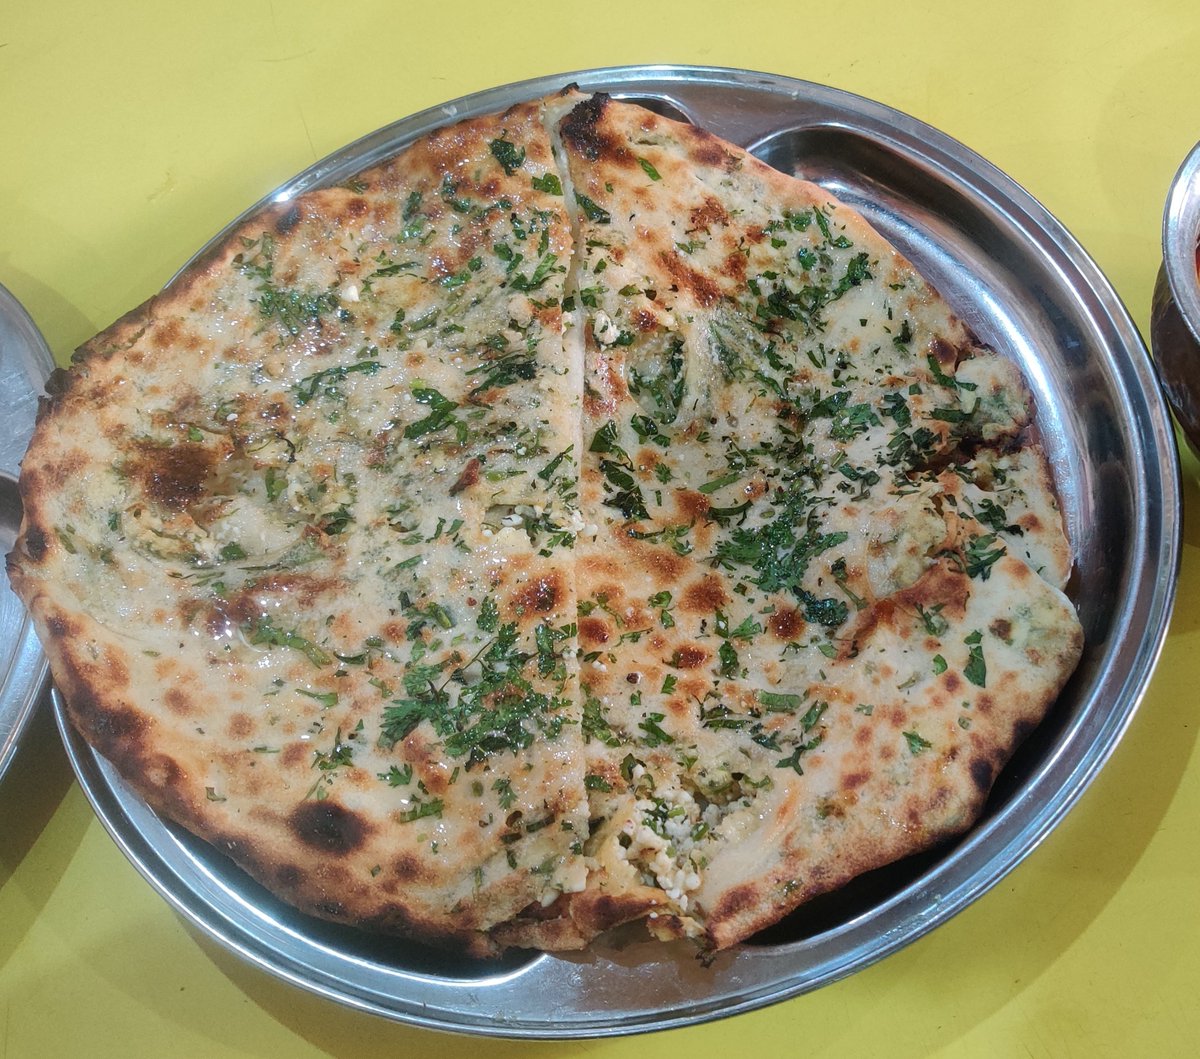 This is a Nikka (small size) Paneer Naan from Kake Di Hatti, Chandni Chowk.

Price: Rs. 90/-